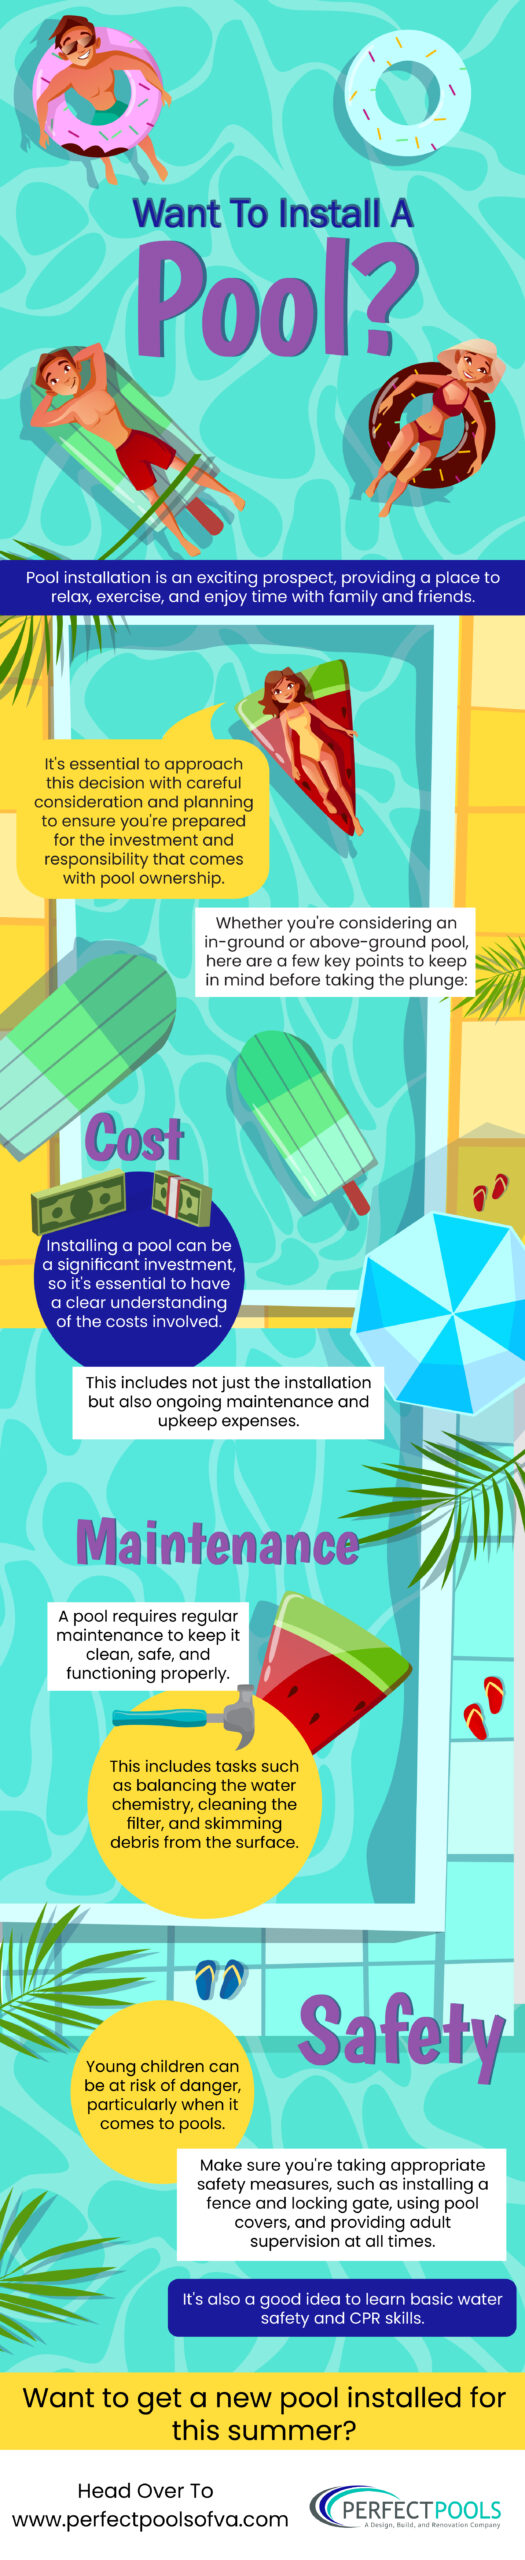 Want to Install a Pool - Infograph